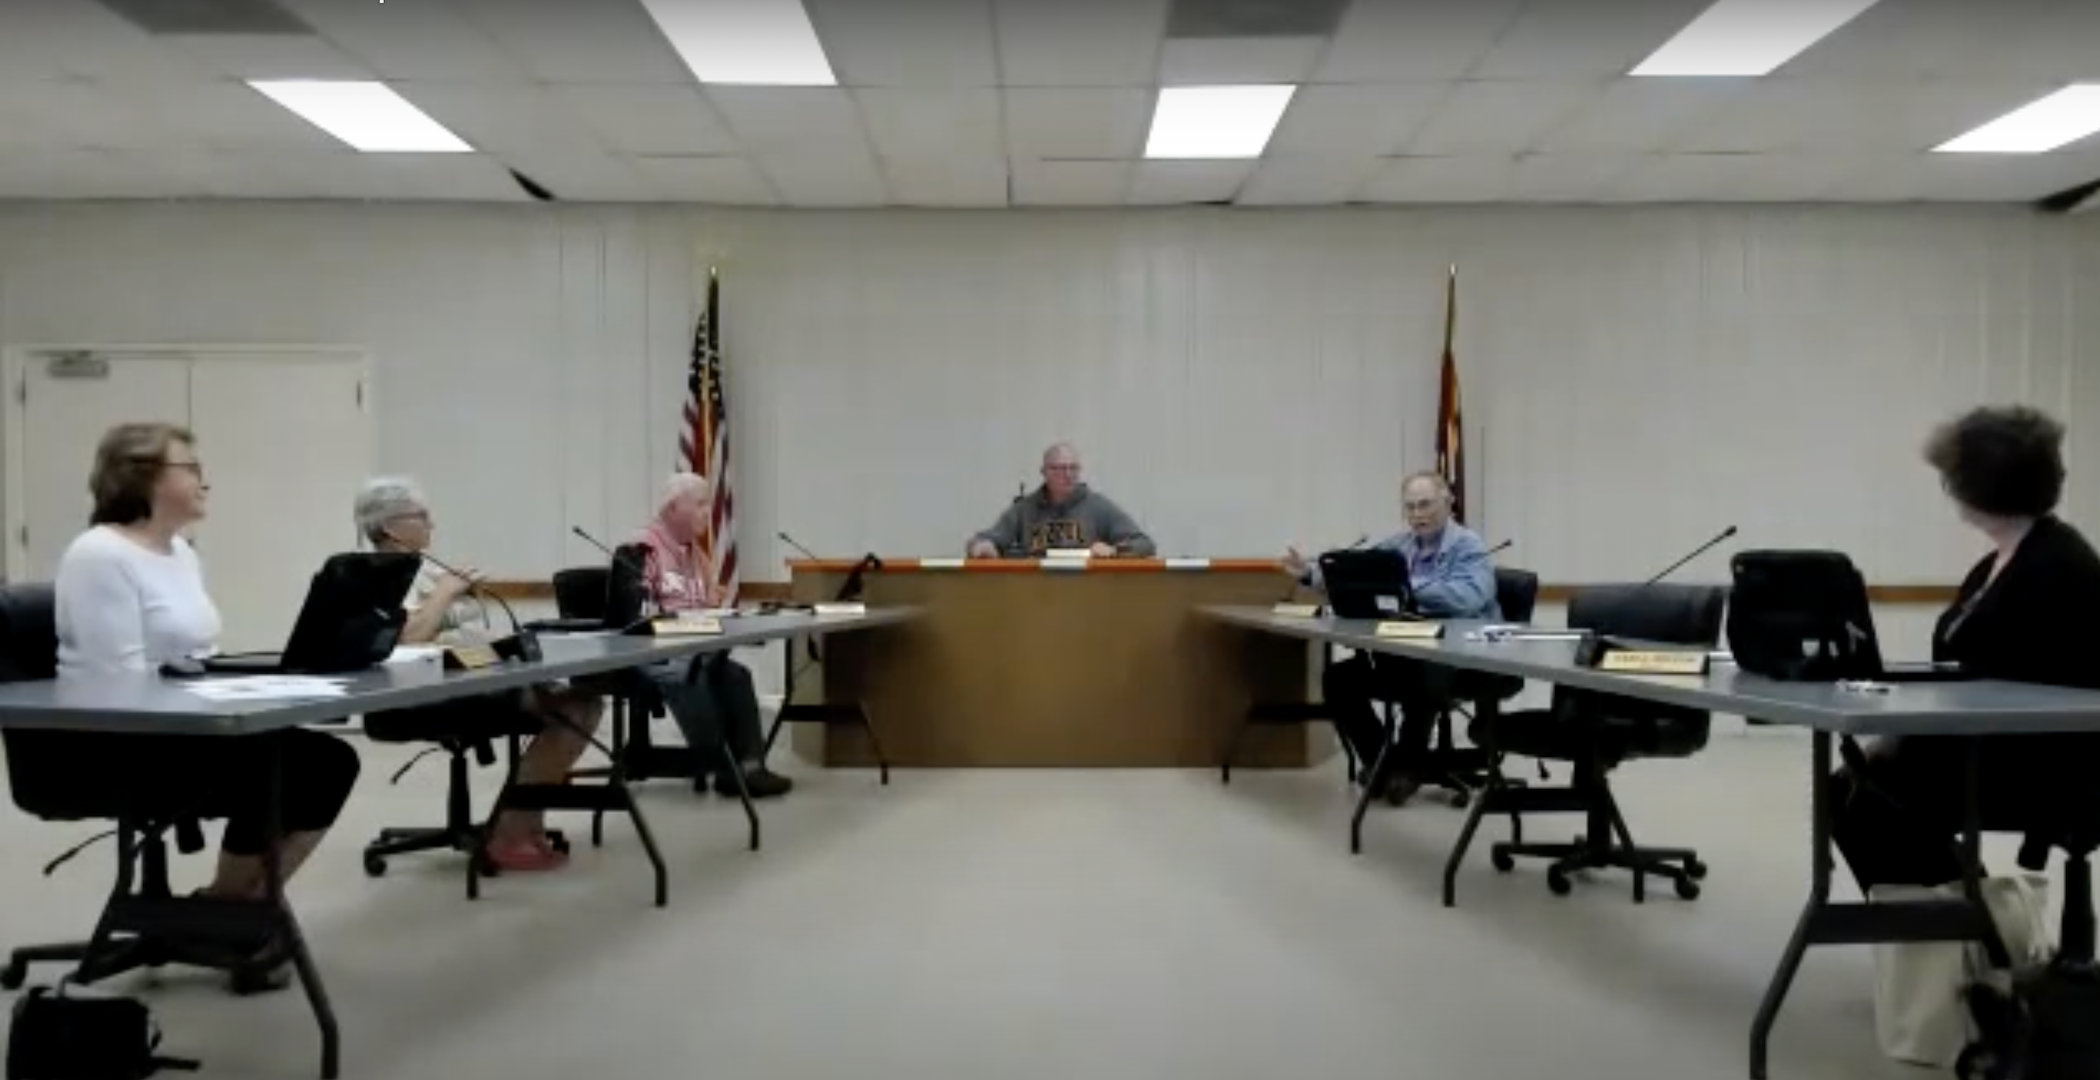 Mayor Stephen Wright of Odessa, Missouri, said the town’s trash collectors are “not trying to Jew anybody” during a meeting of the Board of Aldermen, May 15, 2023. (Screenshot)